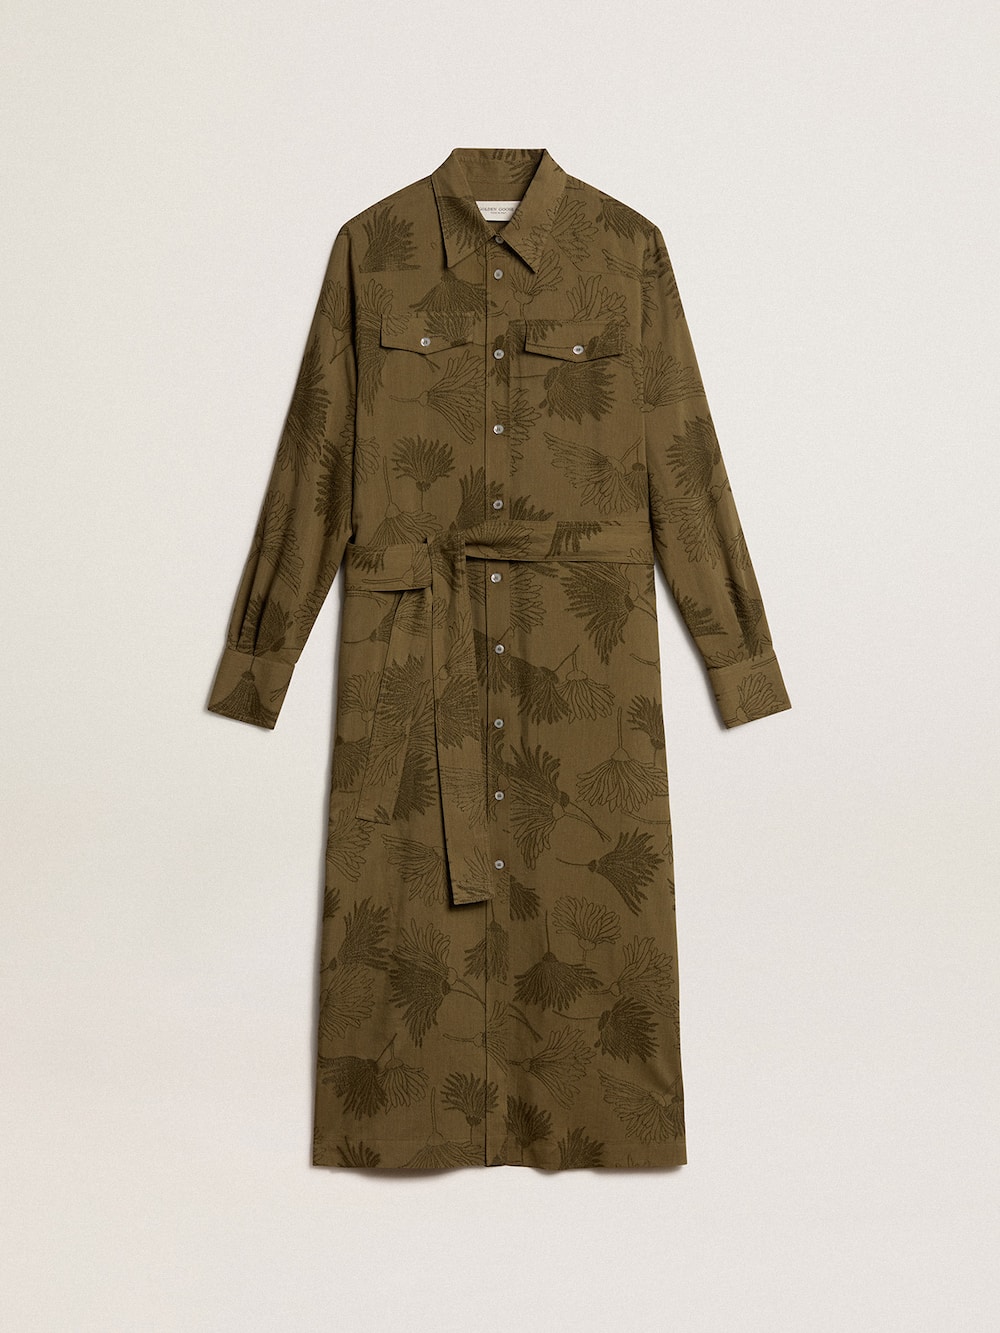 Golden Goose - Women's viscose and cotton shirt dress with floral print in 